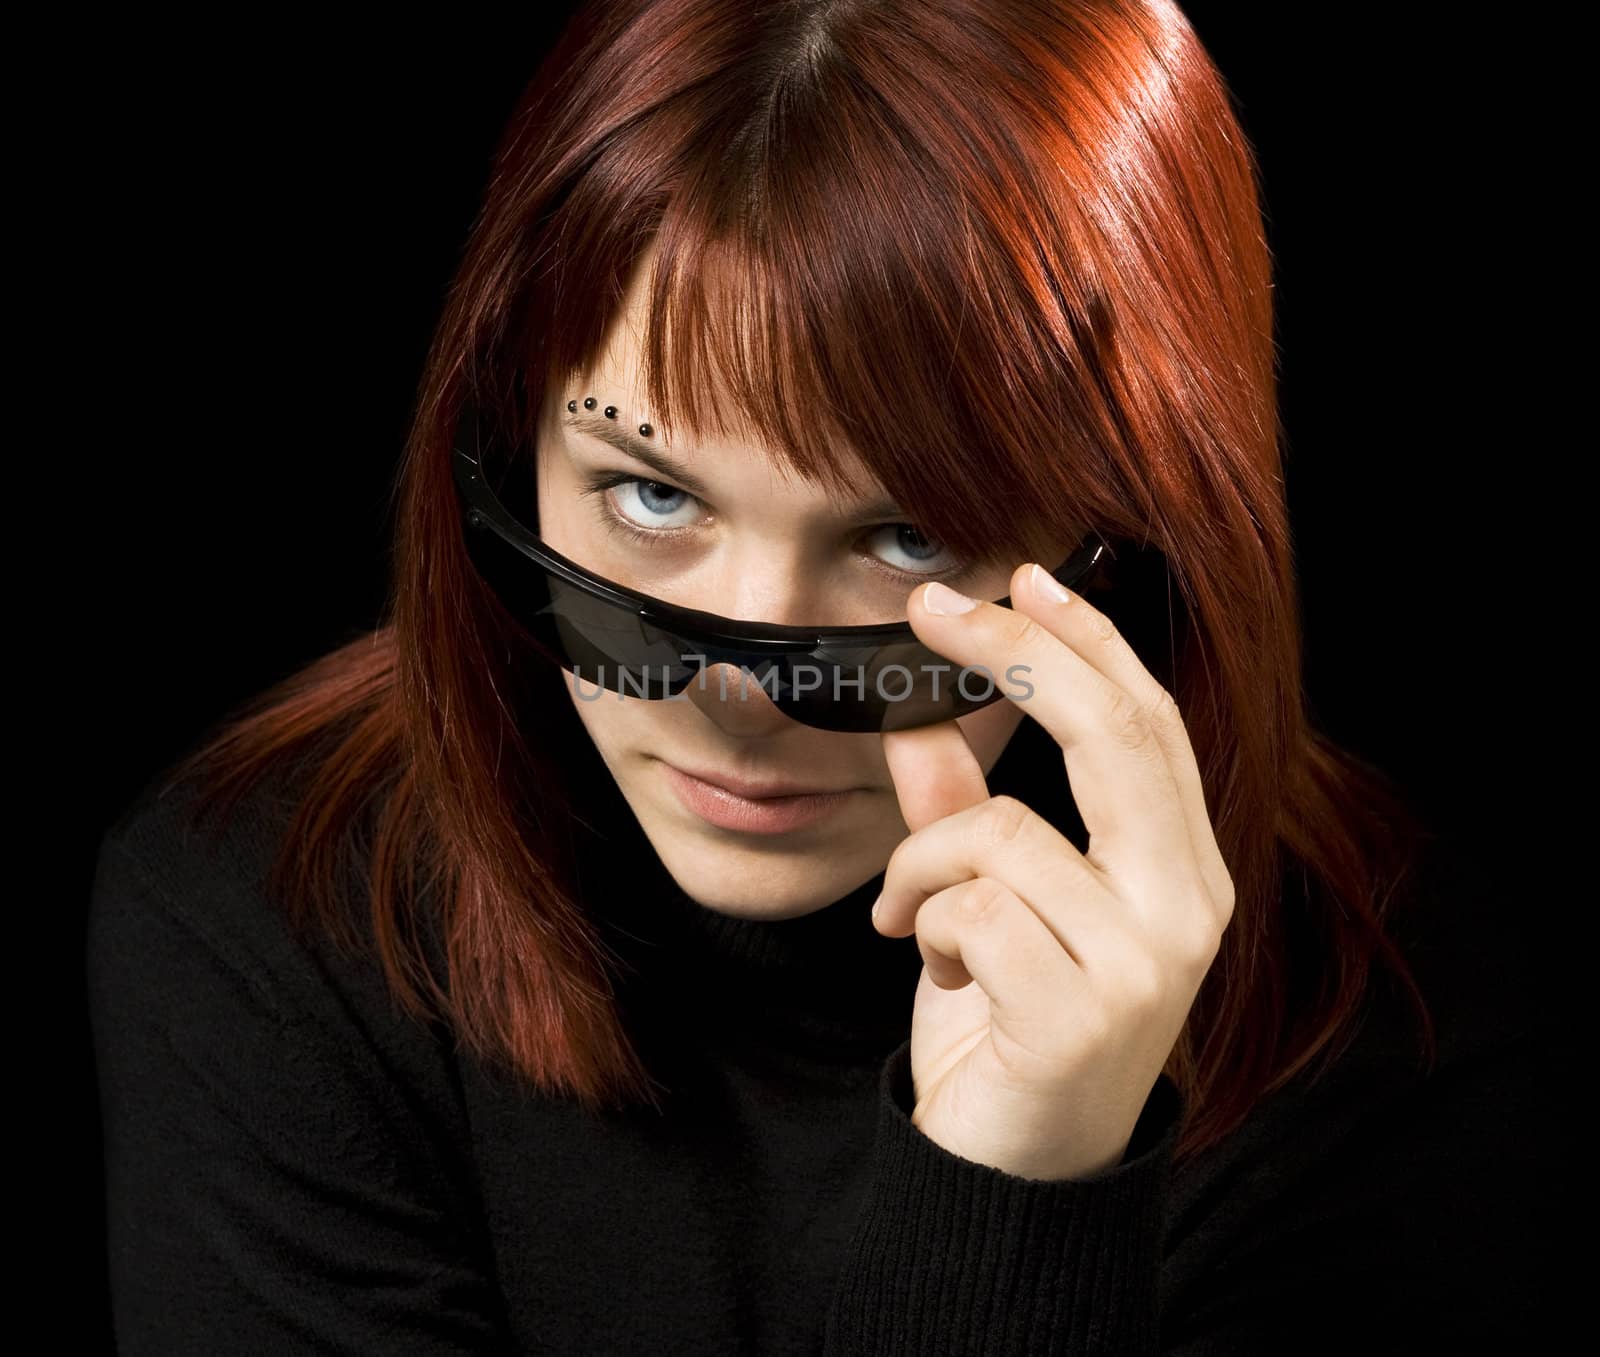 Girl wearing sunglasses and staring through them at the camera, seductively.

Shot in studio.